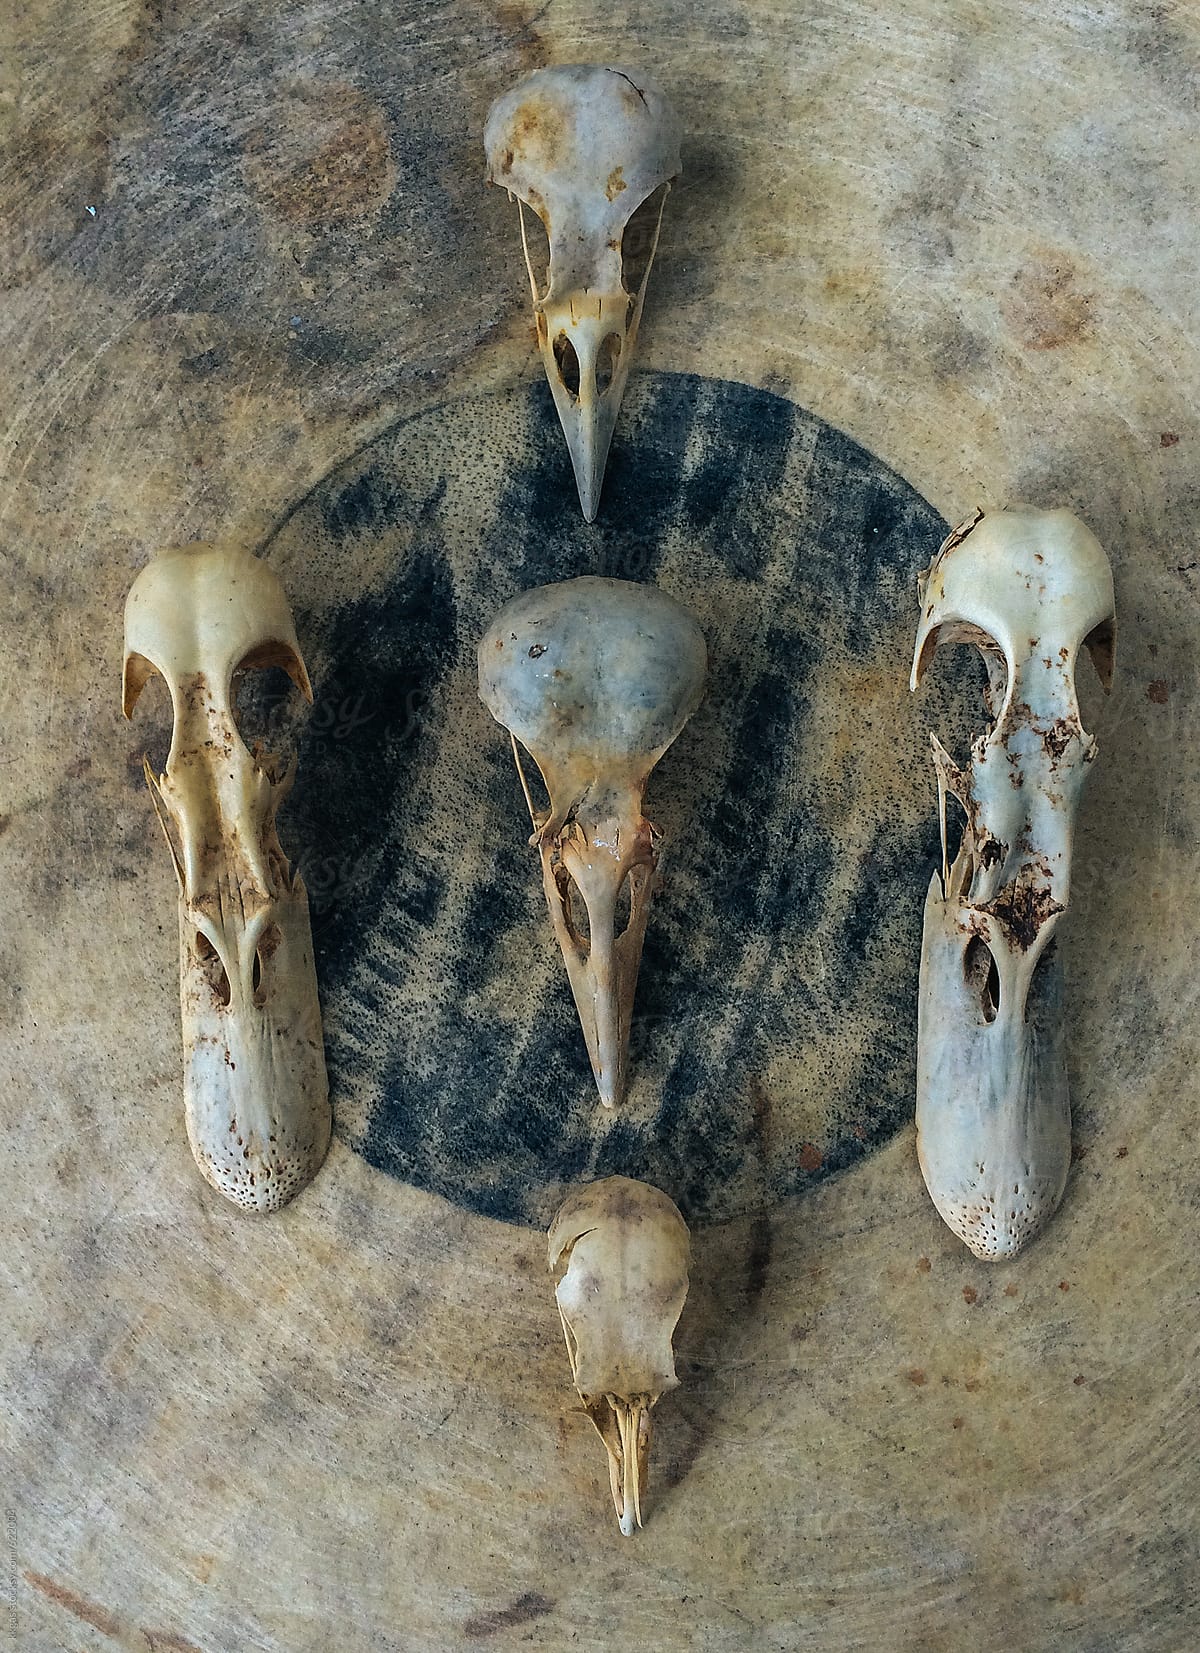 A collection of bird skulls including crow and duck